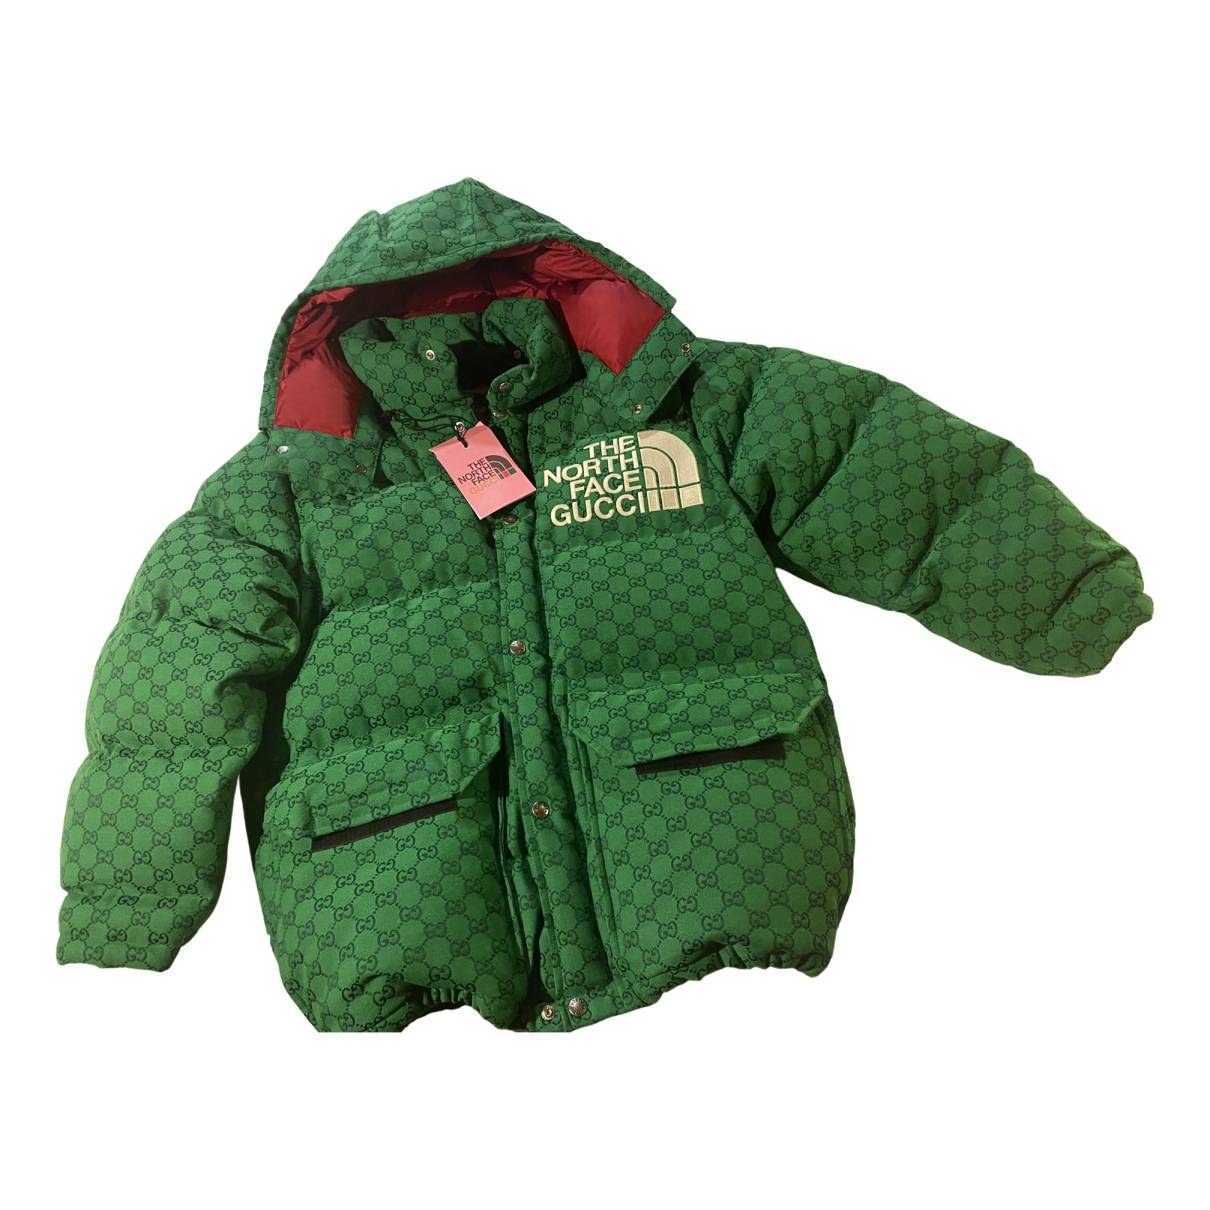 Gucci Jackets & Coats | Rare! The North Face x Gucci Down Jacket Puffer Parka Sz M Adder Green Firm | Color: Green/Red | Size: M | Pm-02313539's